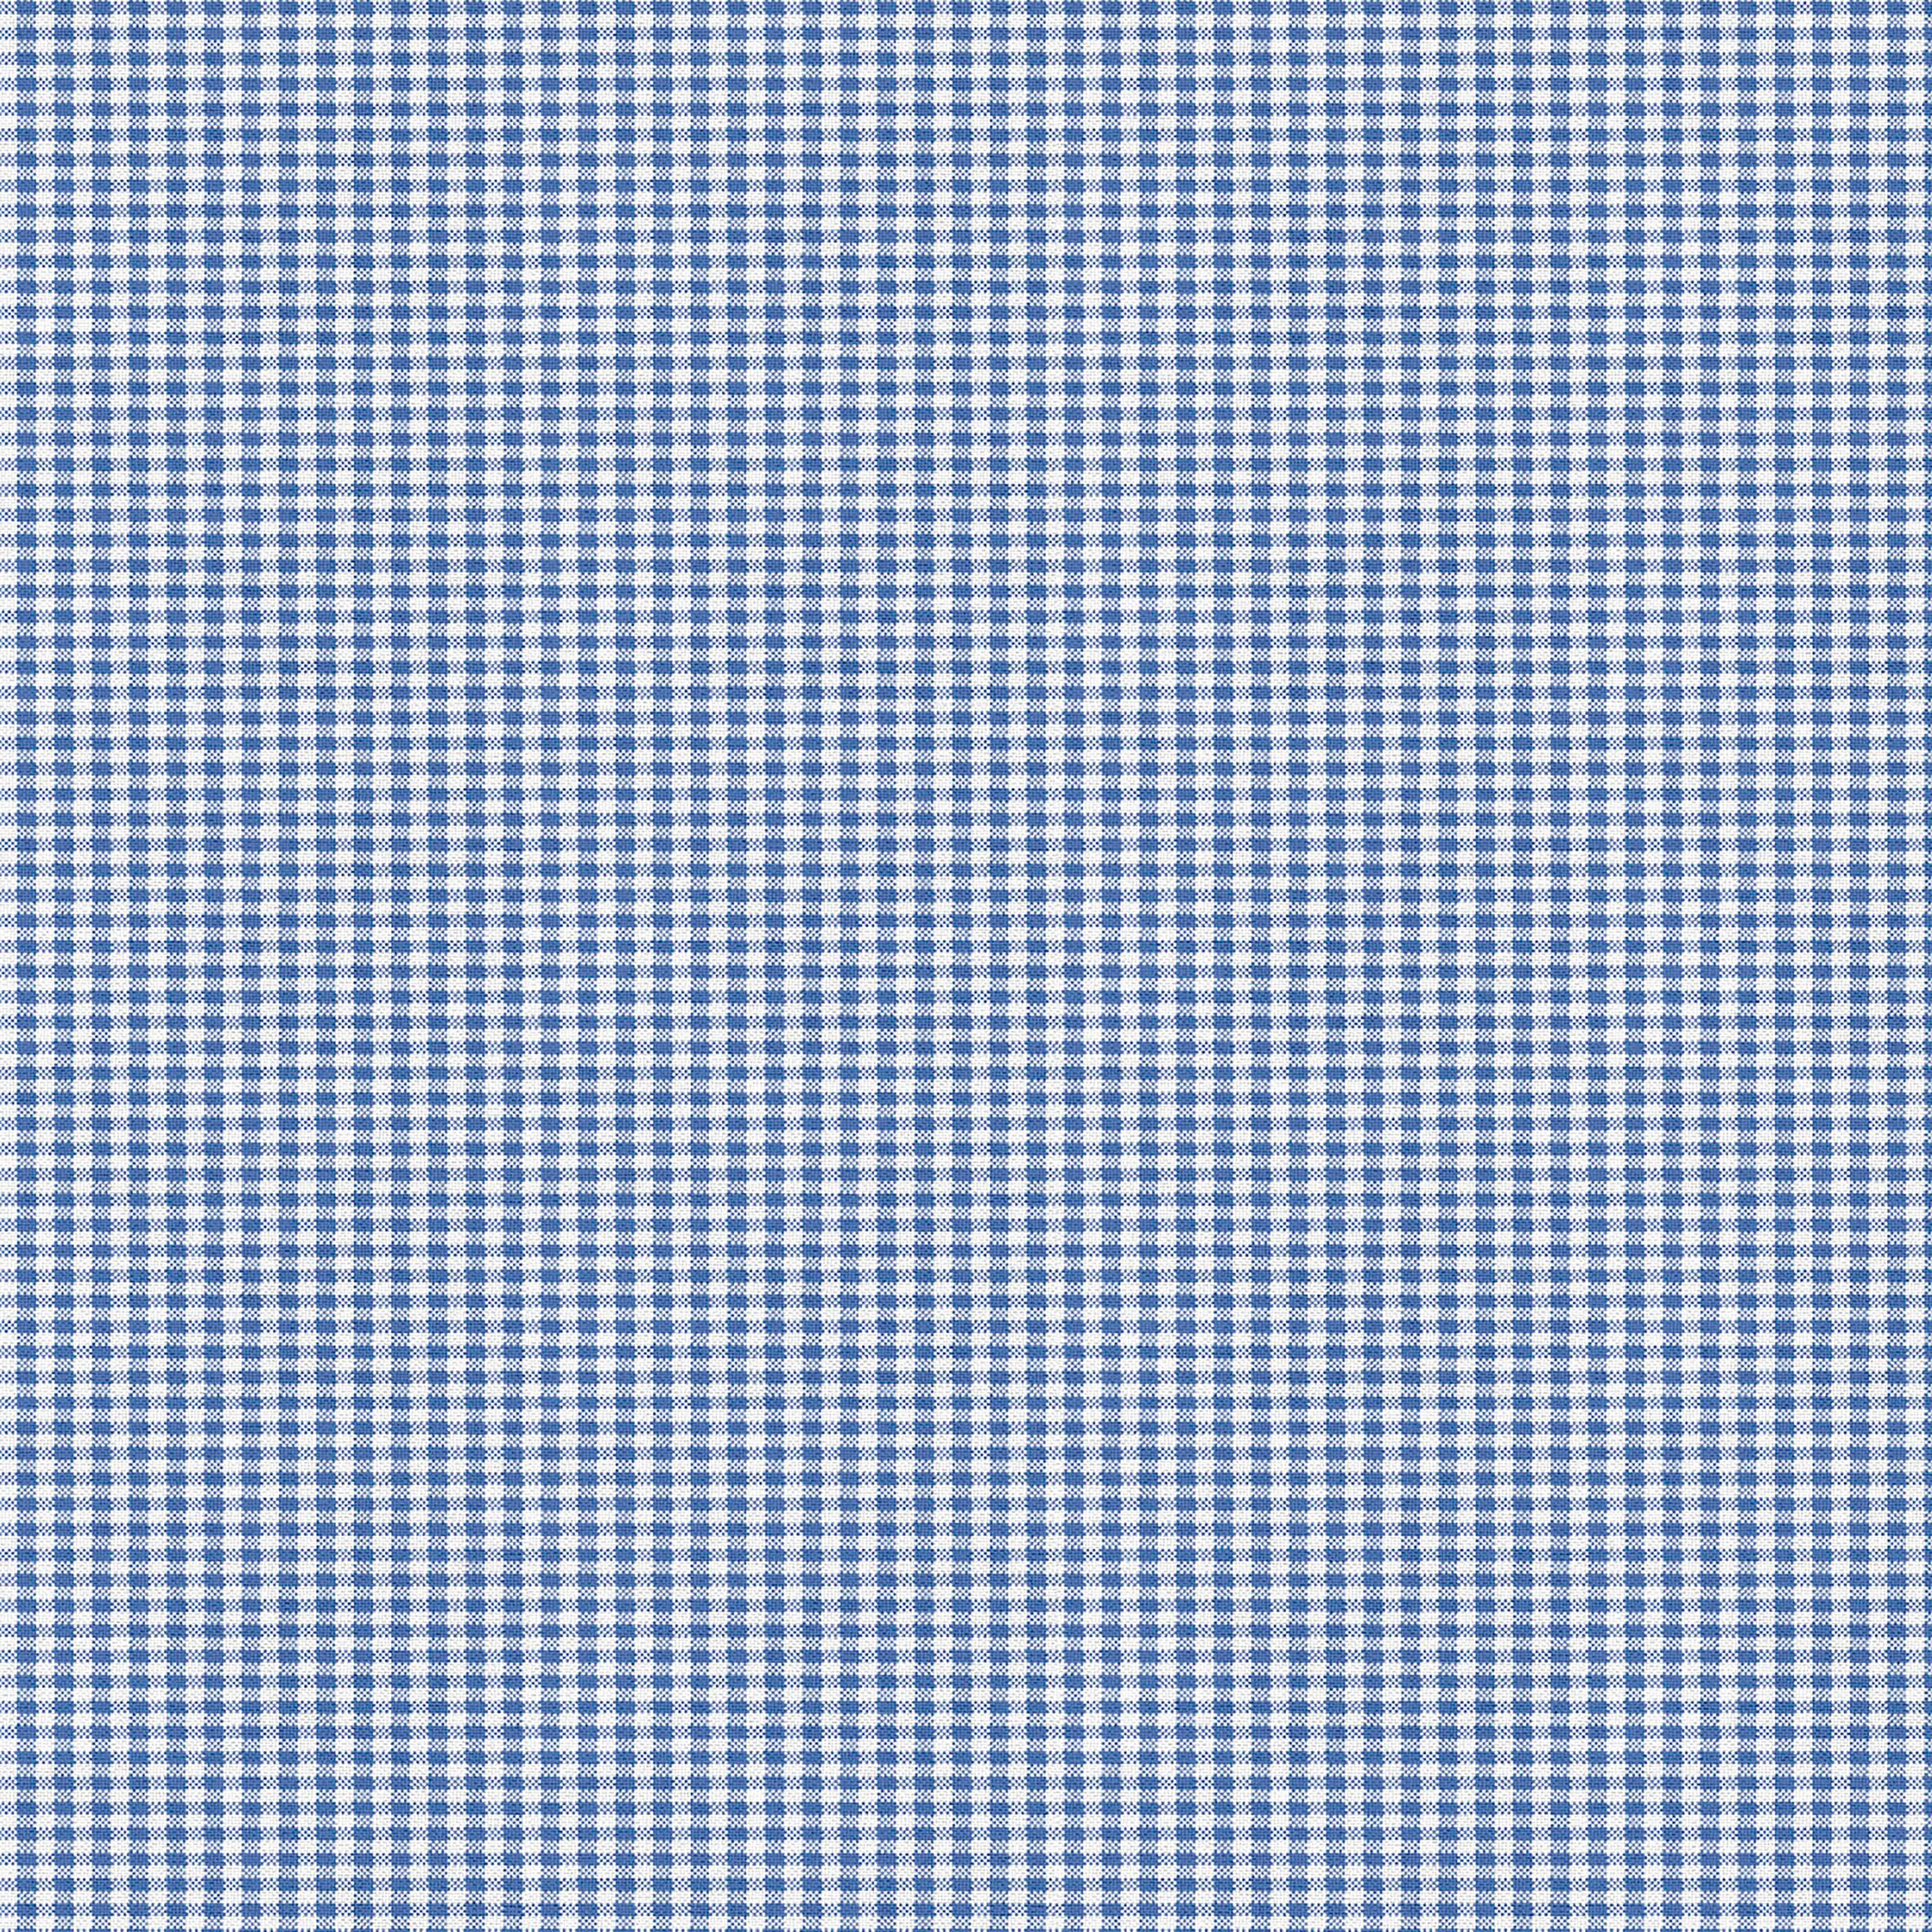 Fabric Editions Blue Gingham Cotton Fabric